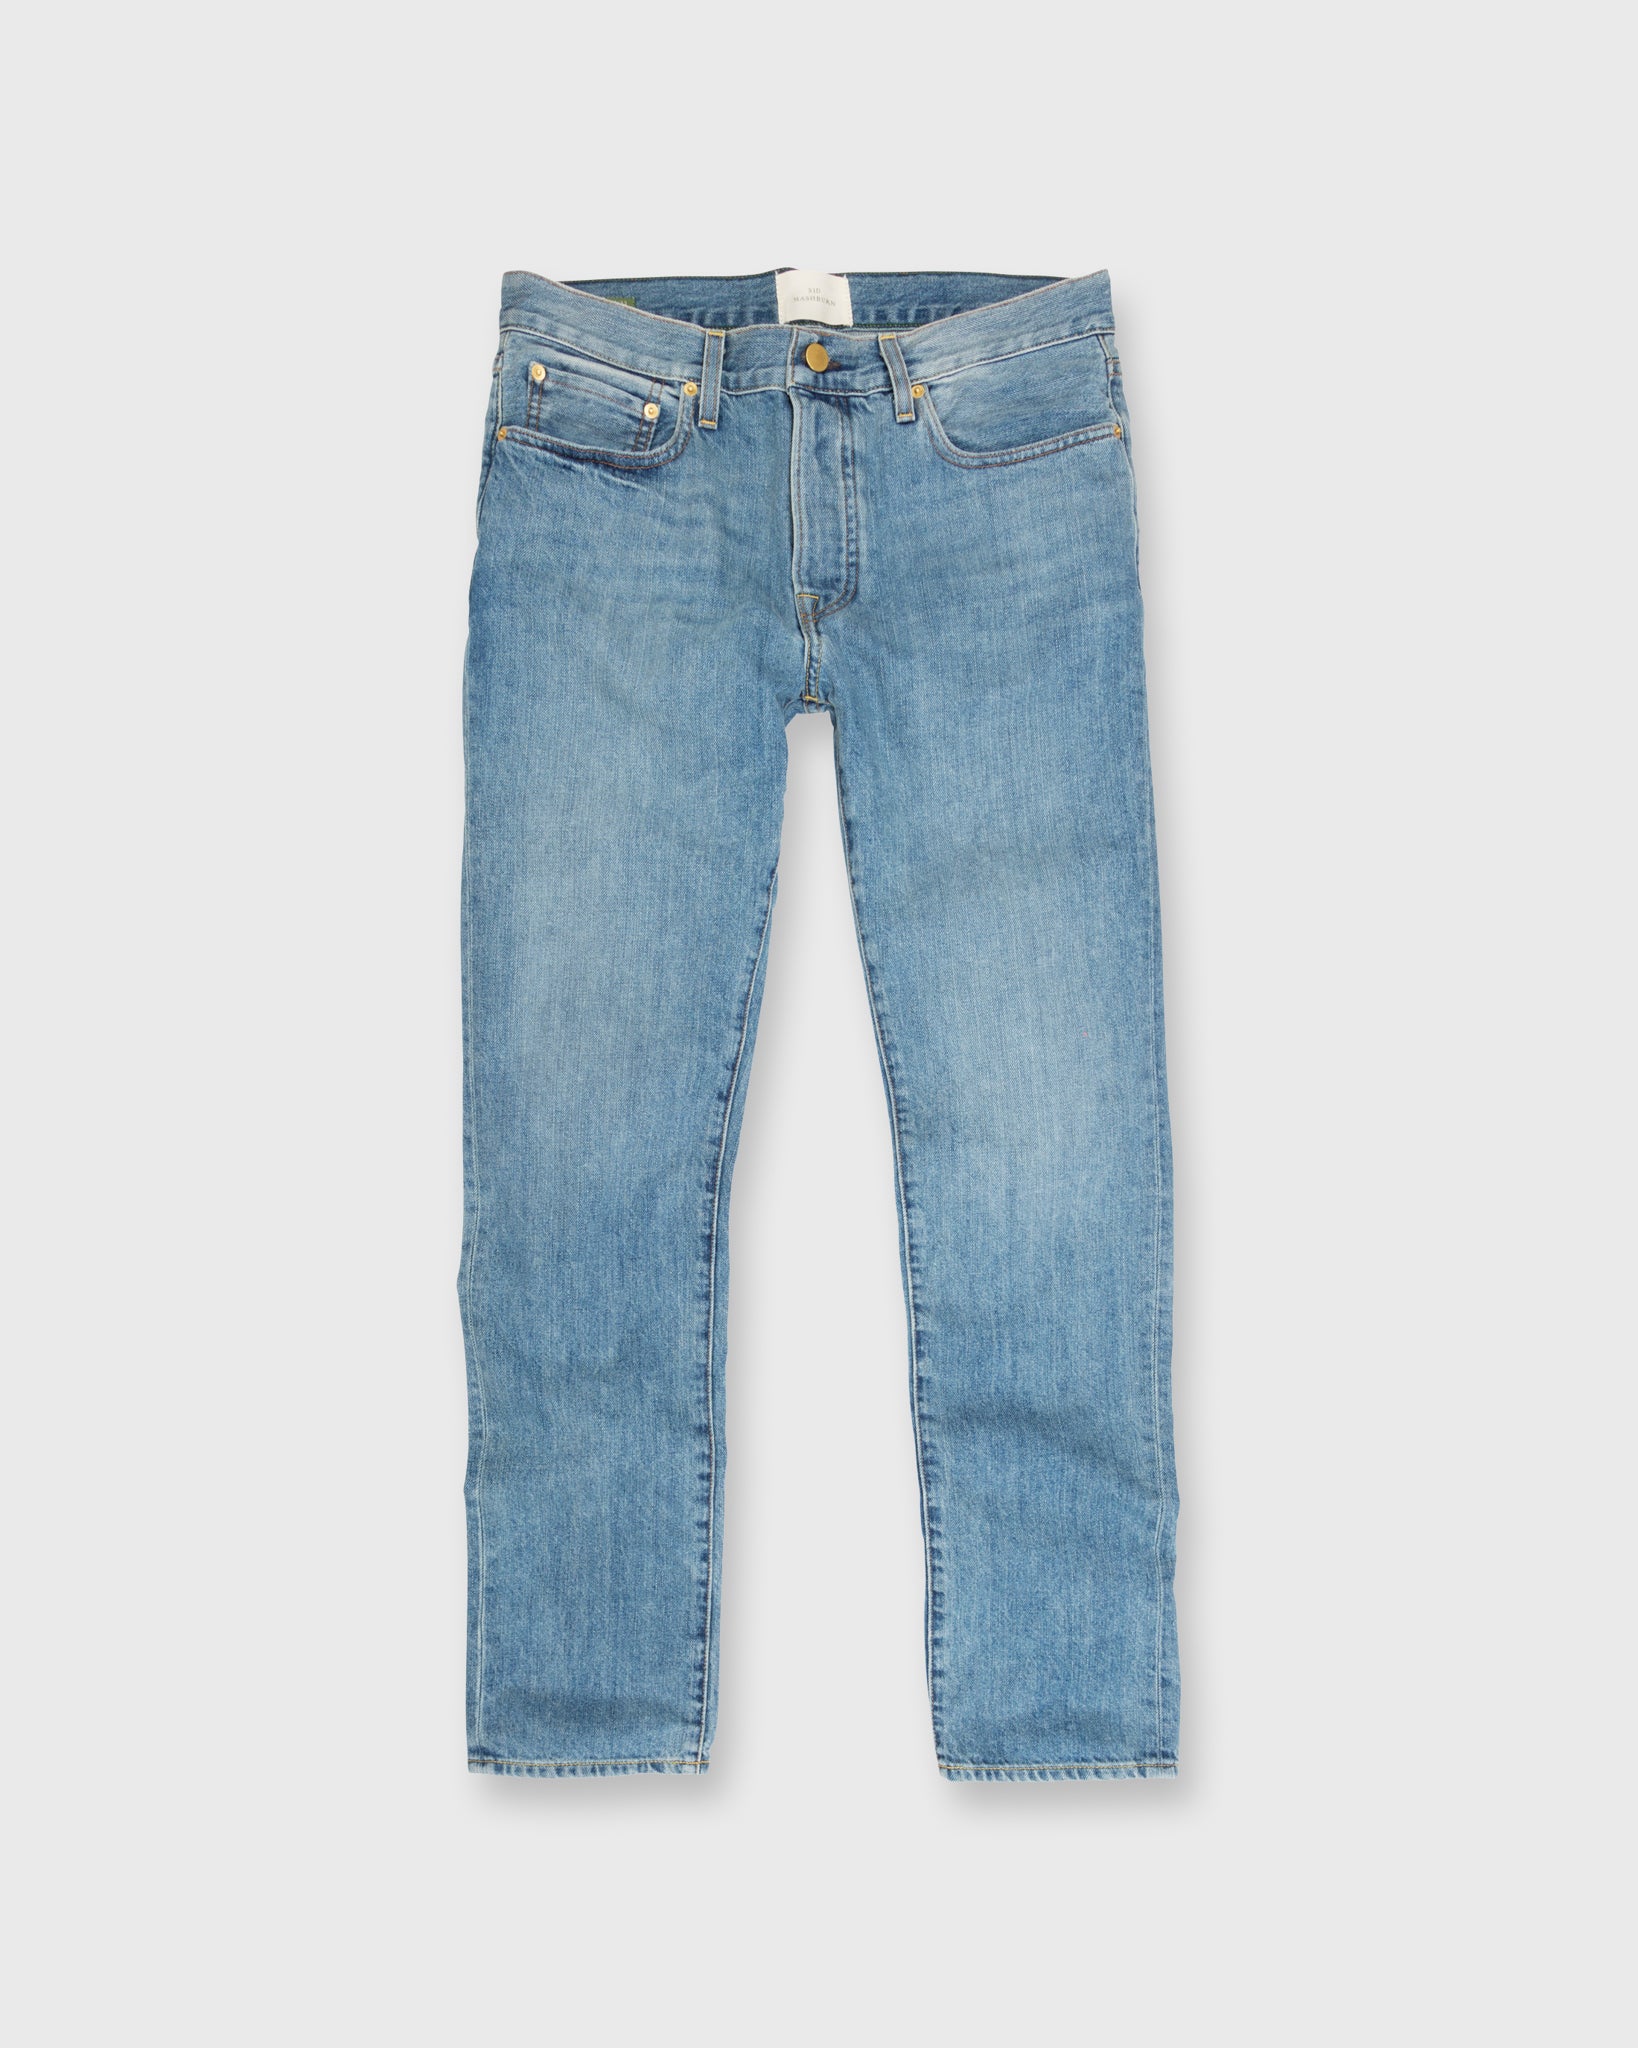 New Kenzie relaxed jeans - Light blue wash – NORR